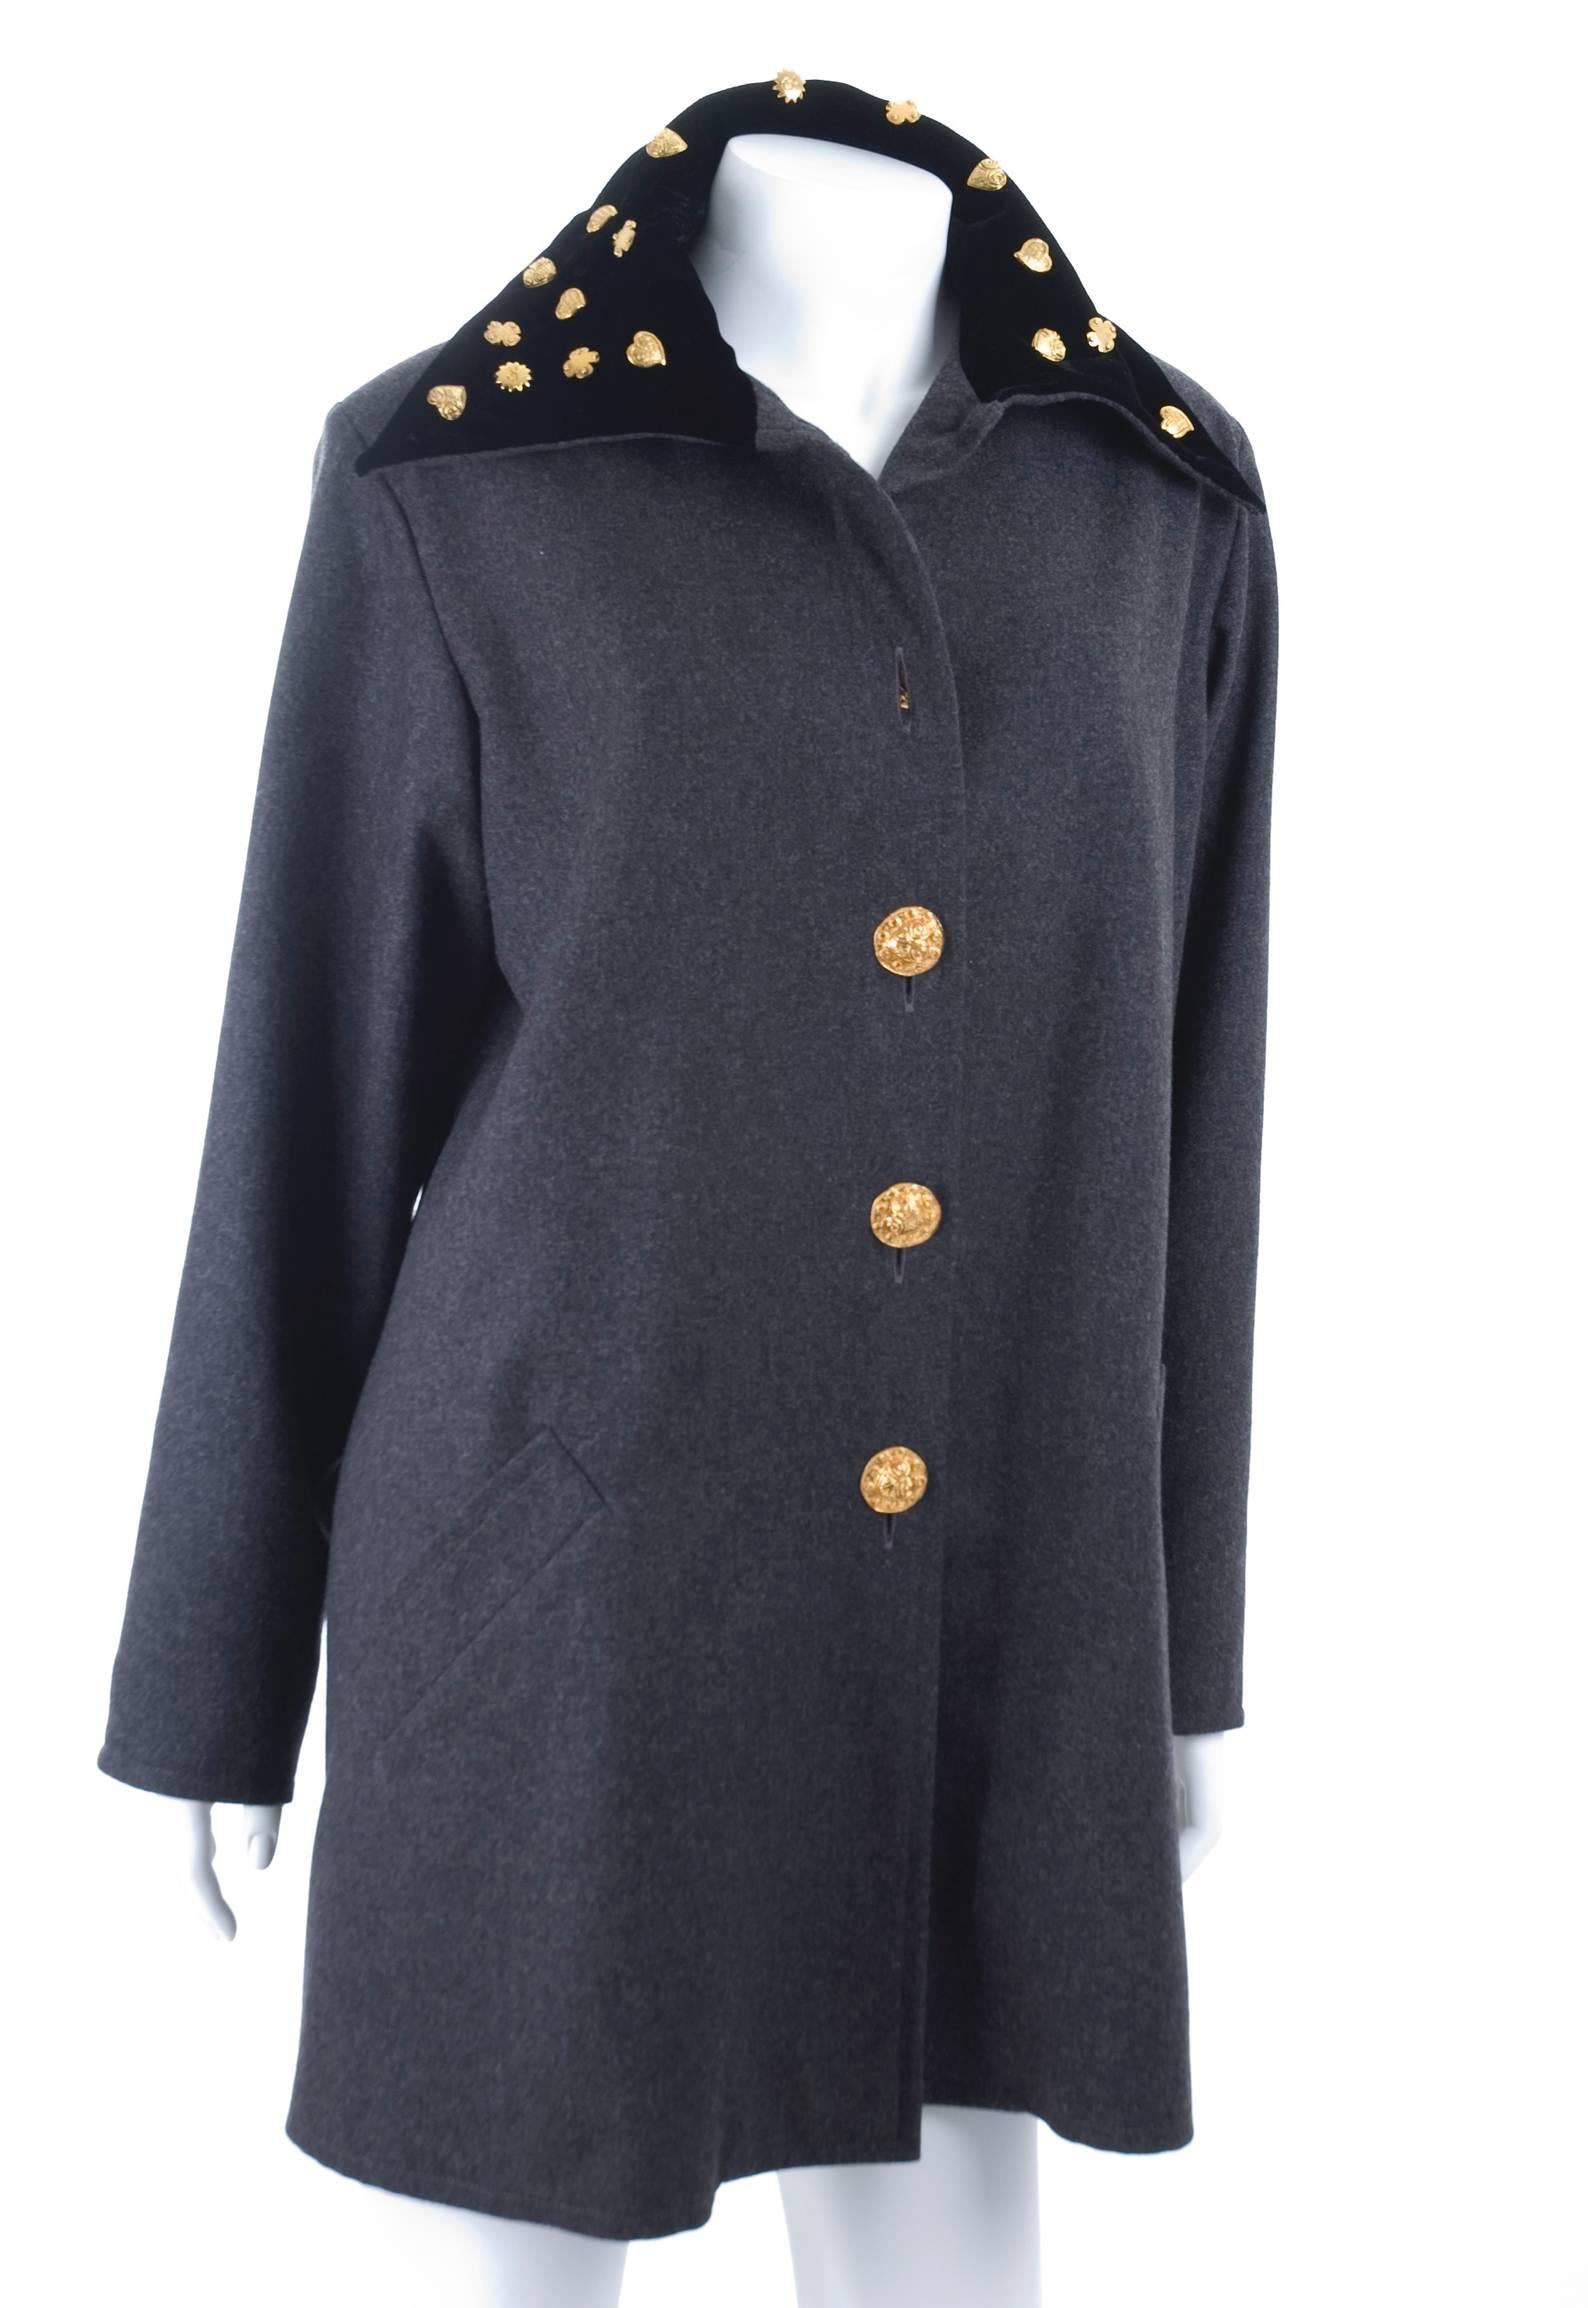 Beautiful Christian Lacroix A-Line Jacket with black velvet collar and gilded studs. Also the buttons by Lacroix always an art piece.
Grey wool light weight and lined.
Excellent condition - no flaws to mention.
Size US 10
Measurements:
Length